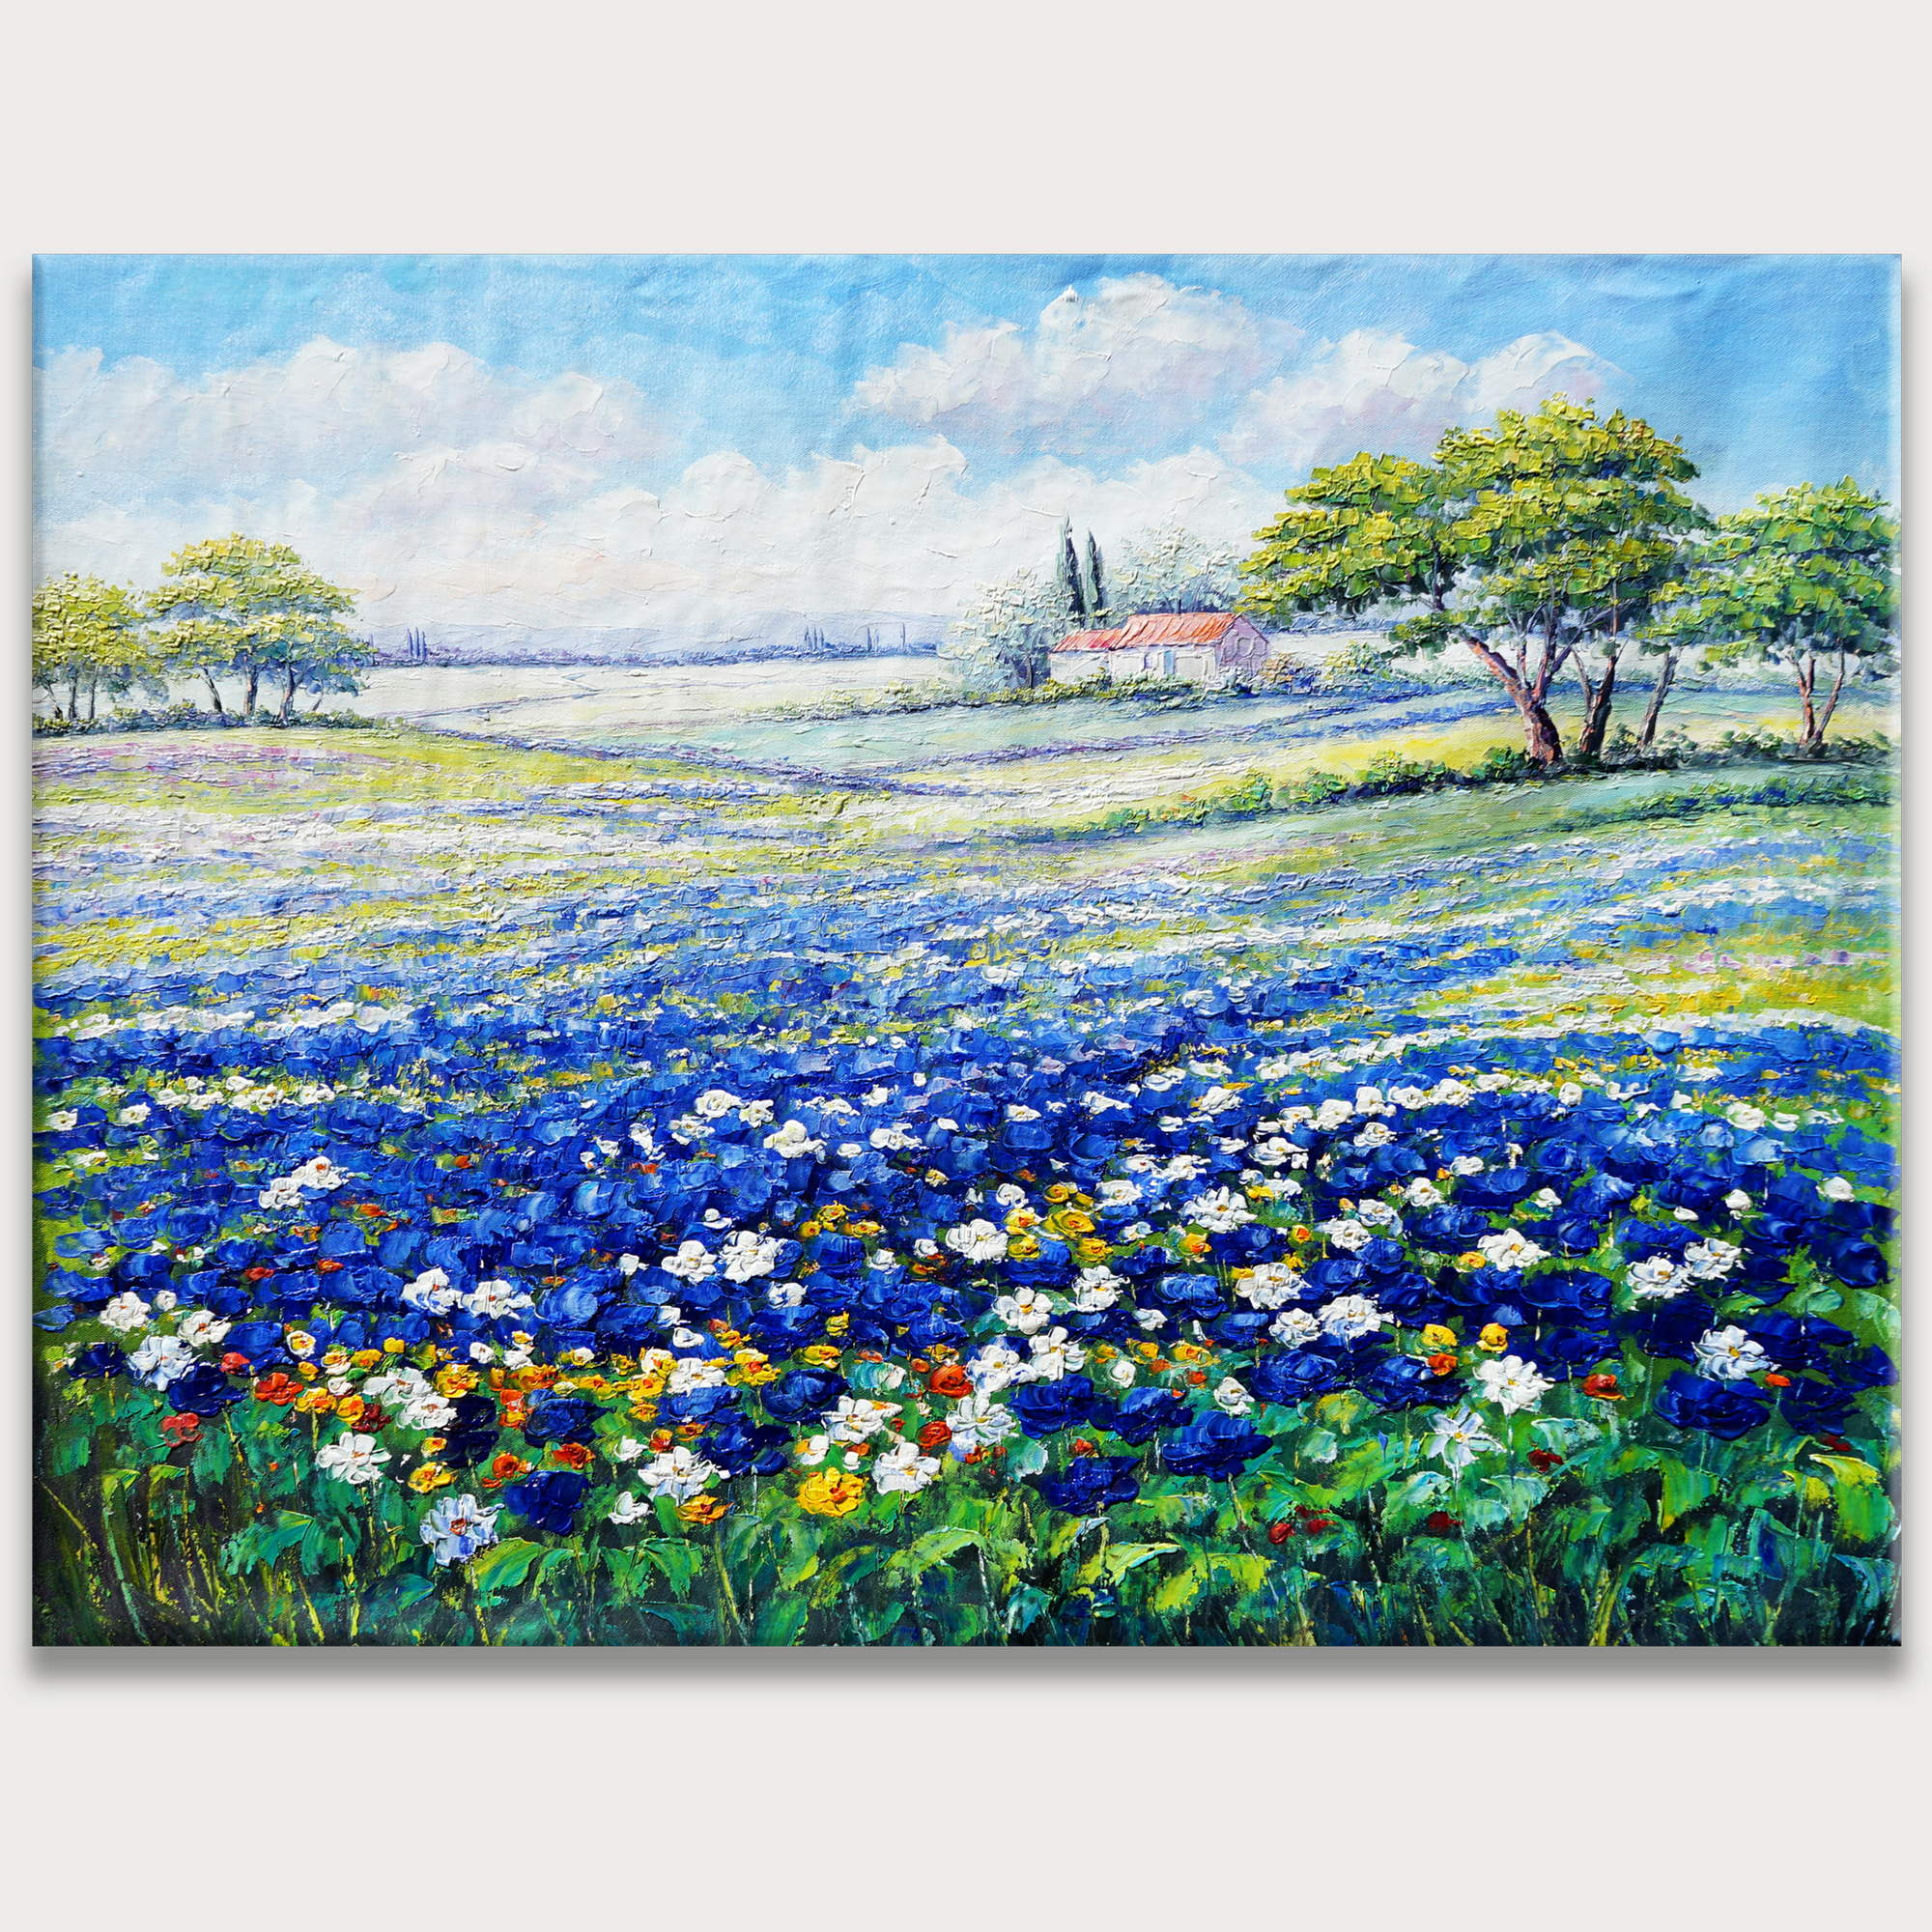 Hand painted Field of Flowers 75x100cm